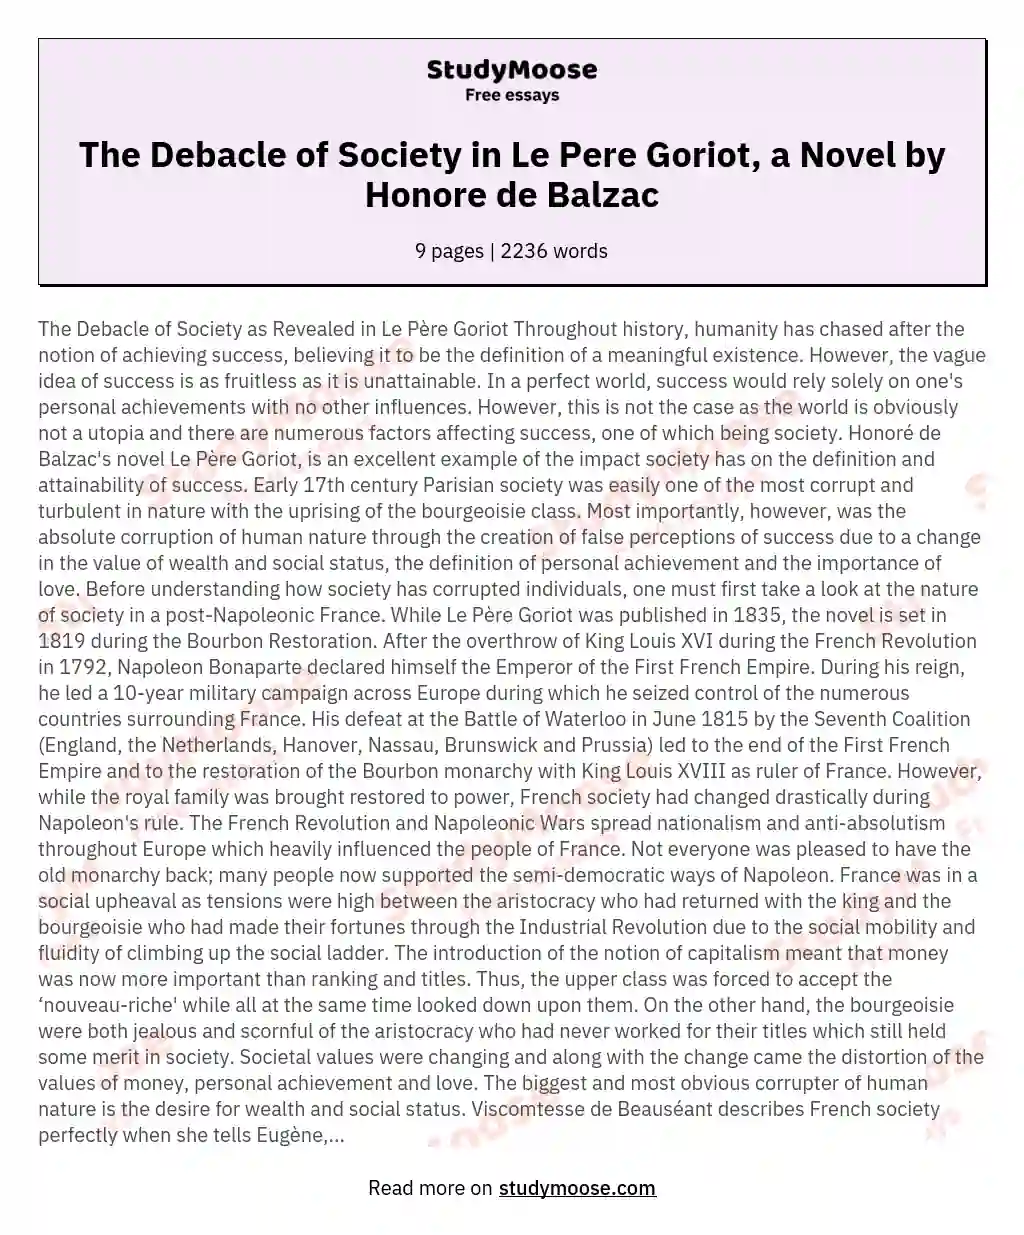 The Debacle of Society in Le Pere Goriot, a Novel by Honore de Balzac essay